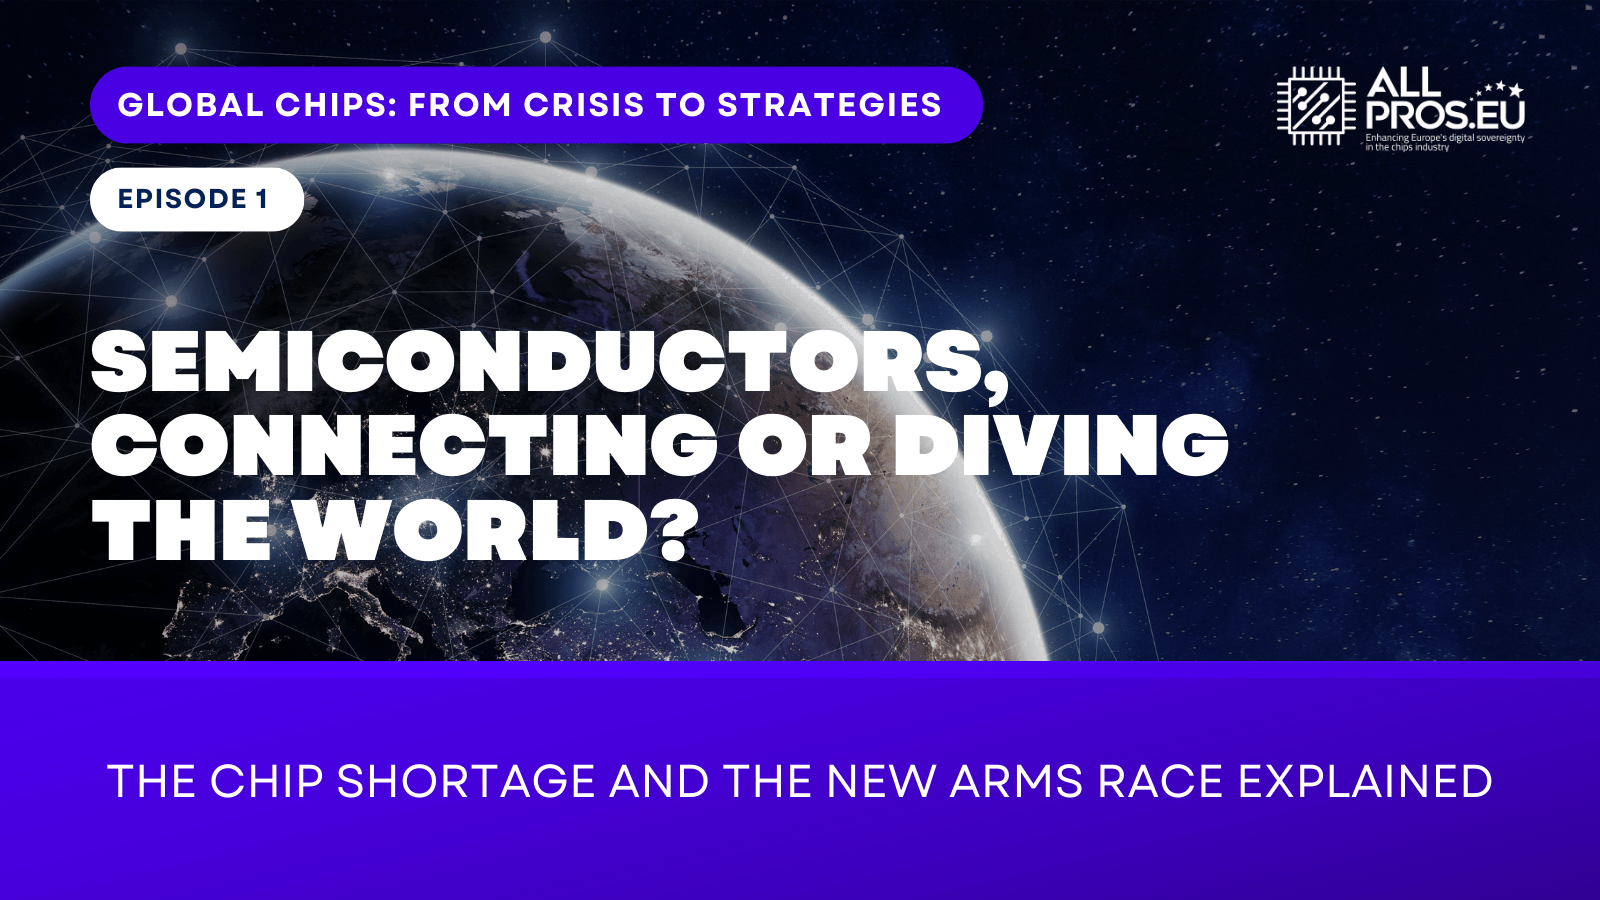 GLOBAL CHIPS: FROM CRISIS TO STRATEGIES EPISODE 1 - Semiconductors, connecting or dividing the world? The chip shortage and the new arms race explained